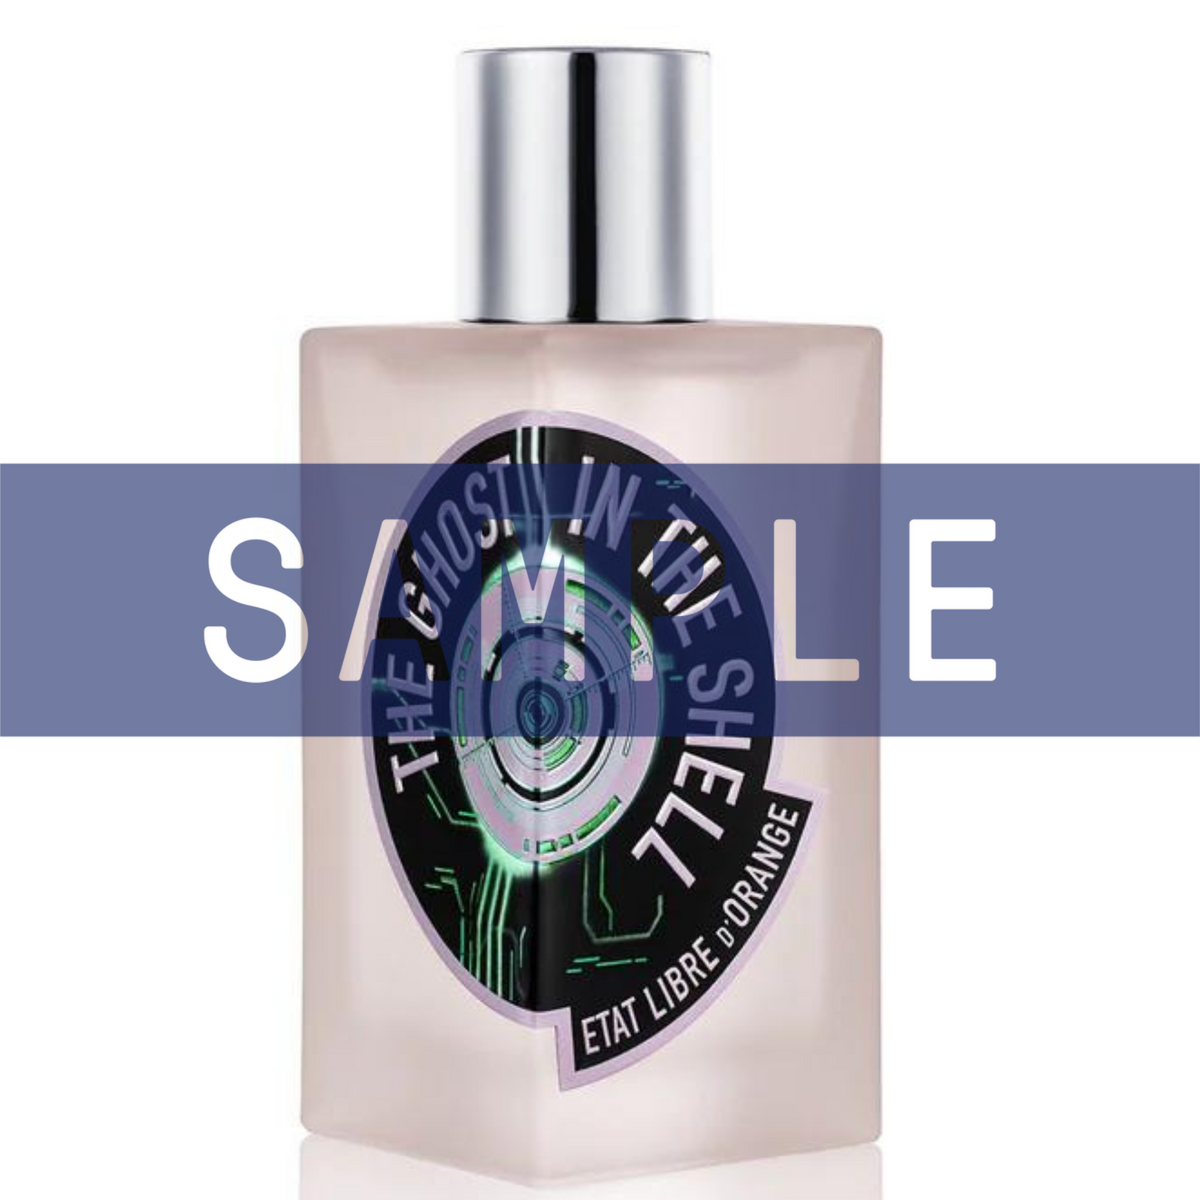 Primary Image of Sample - The Ghost In The Shell Eau De Parfum